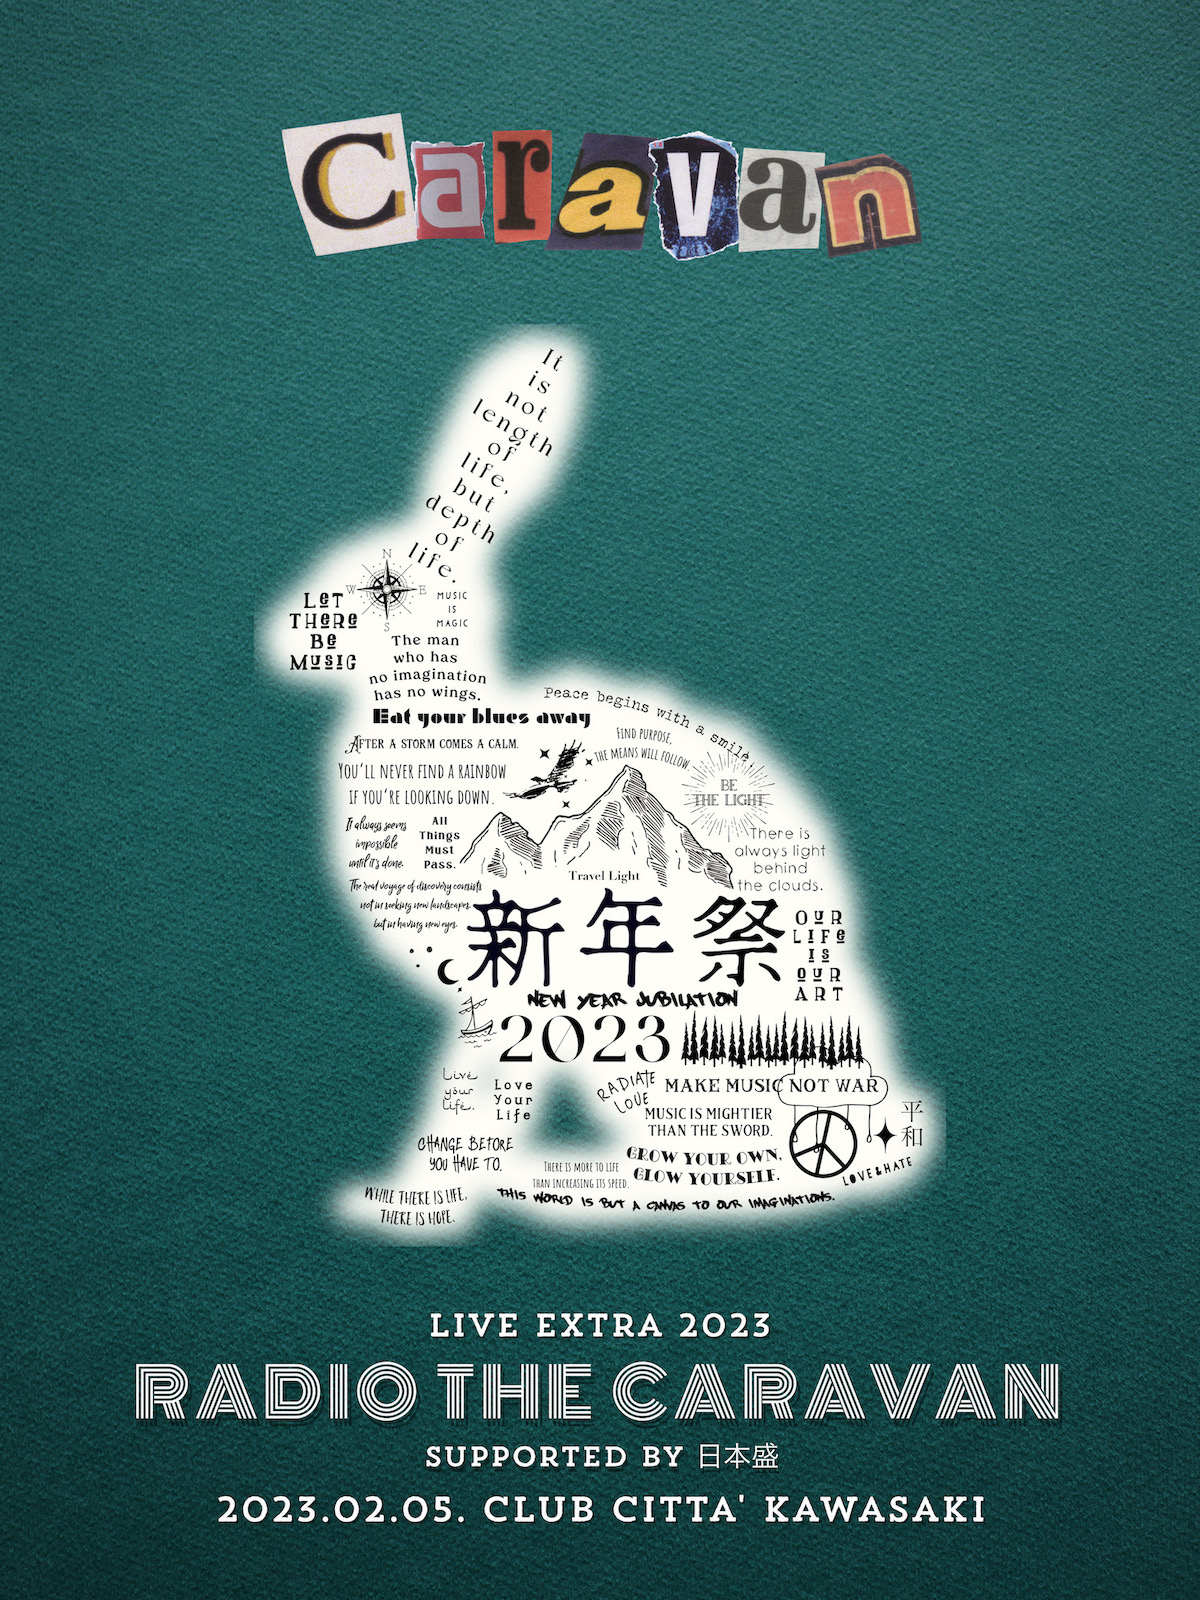 Caravan LIVE EXTRA 2023 新年祭 ”Radio the Caravan” supported by日本盛